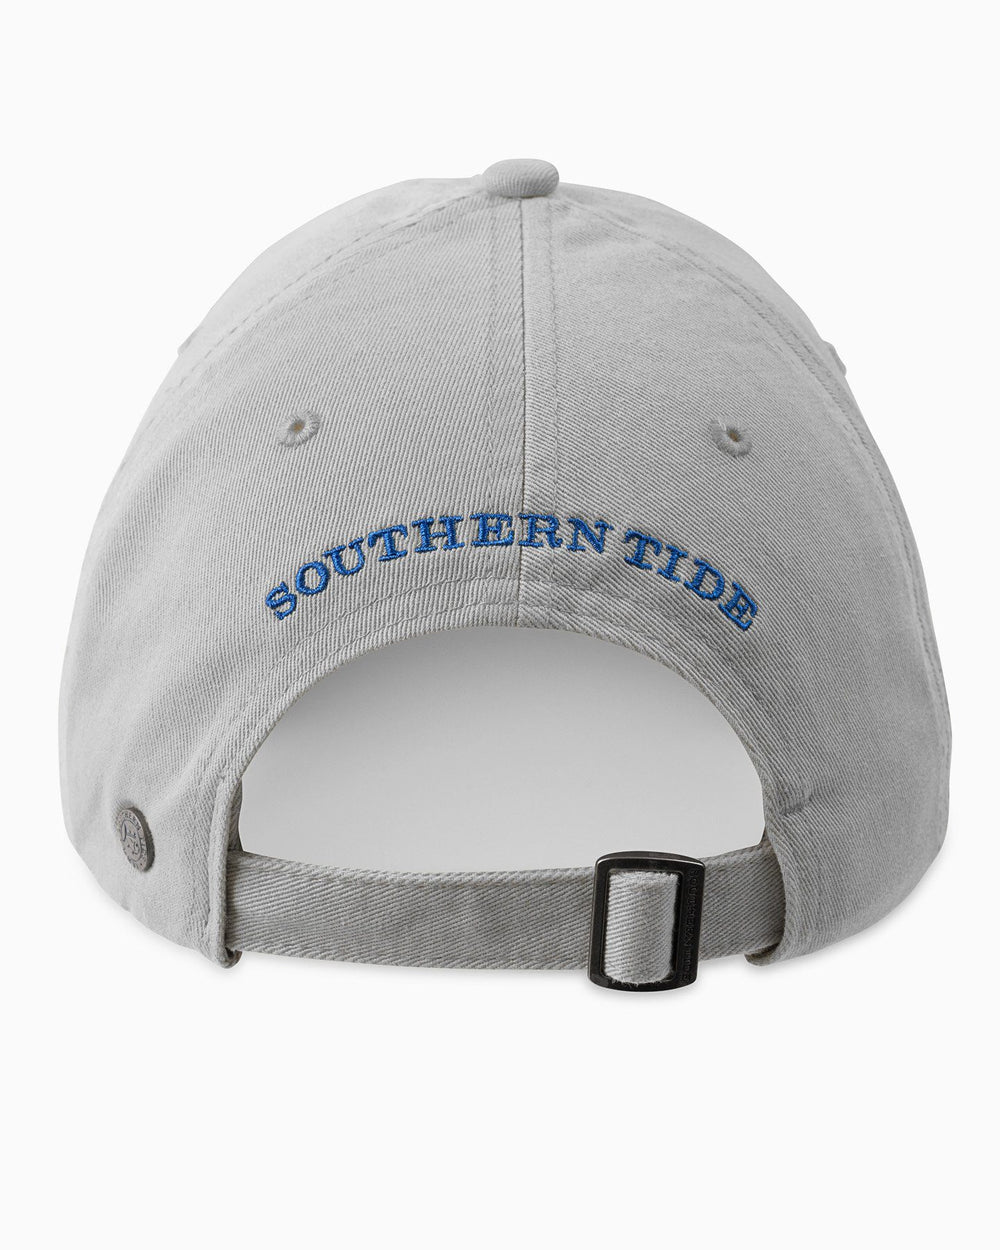 The back of the Skipjack Hat by Southern Tide - Steel Grey